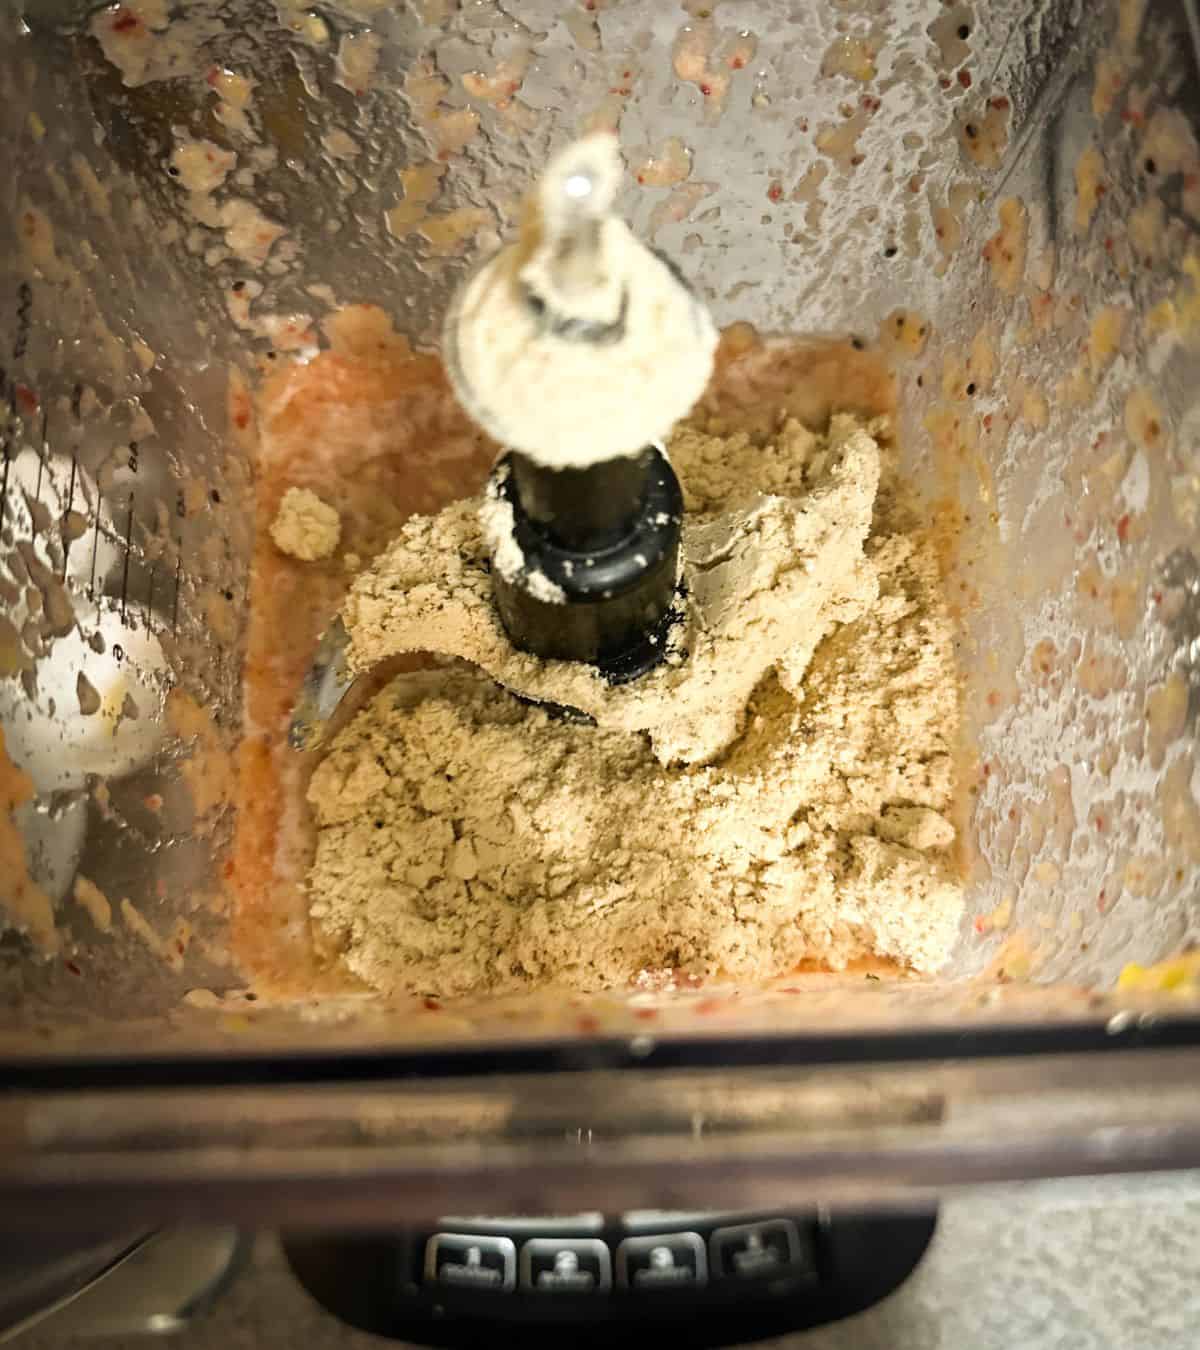 An aerial view of the inside of a a blender that has smoothie partially blended and protein powder scooped on top, ready to continue blending.